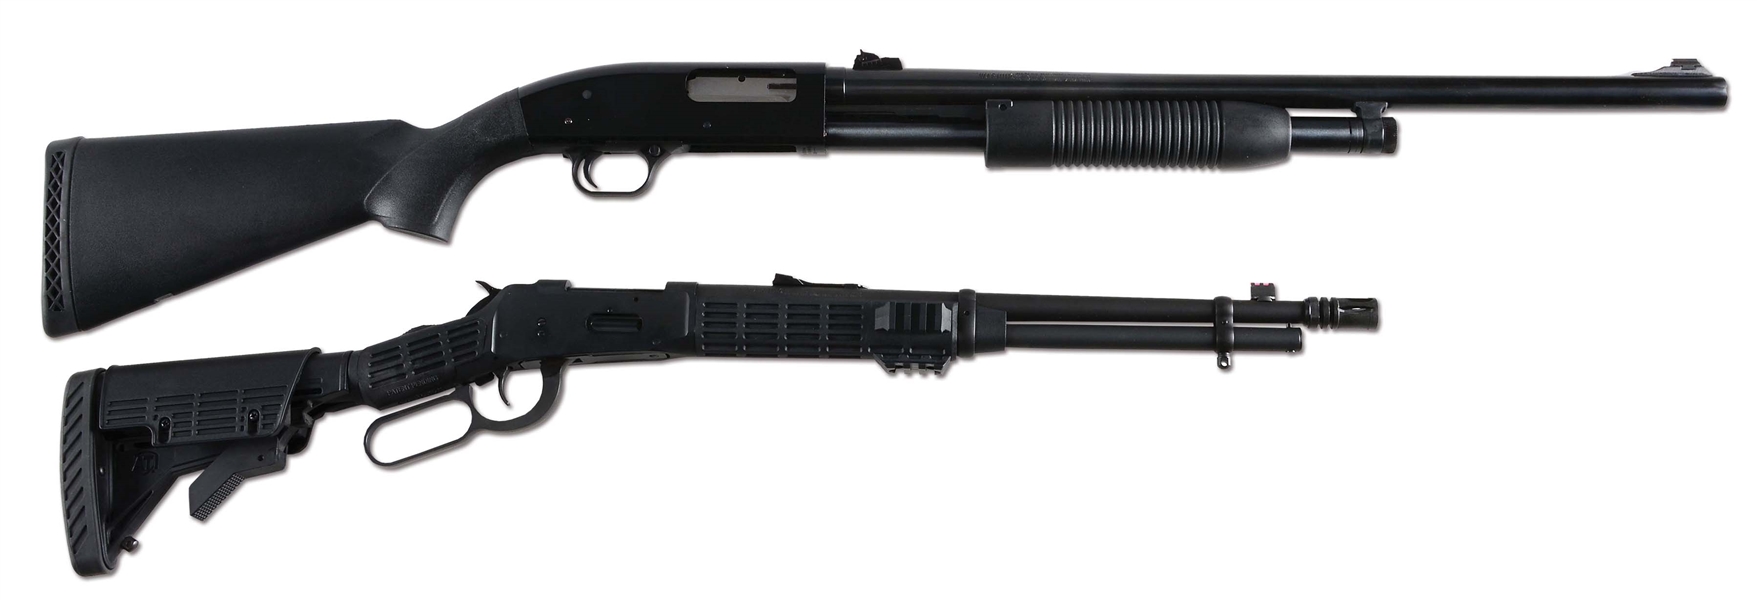 (M) LOT OF 2: ONE NIB MOSSBERG MODEL 464 LEVER ACTION RIFLE AND ONE NIB MOSSBERG MODEL 88 PUMP ACTION SHOTGUN